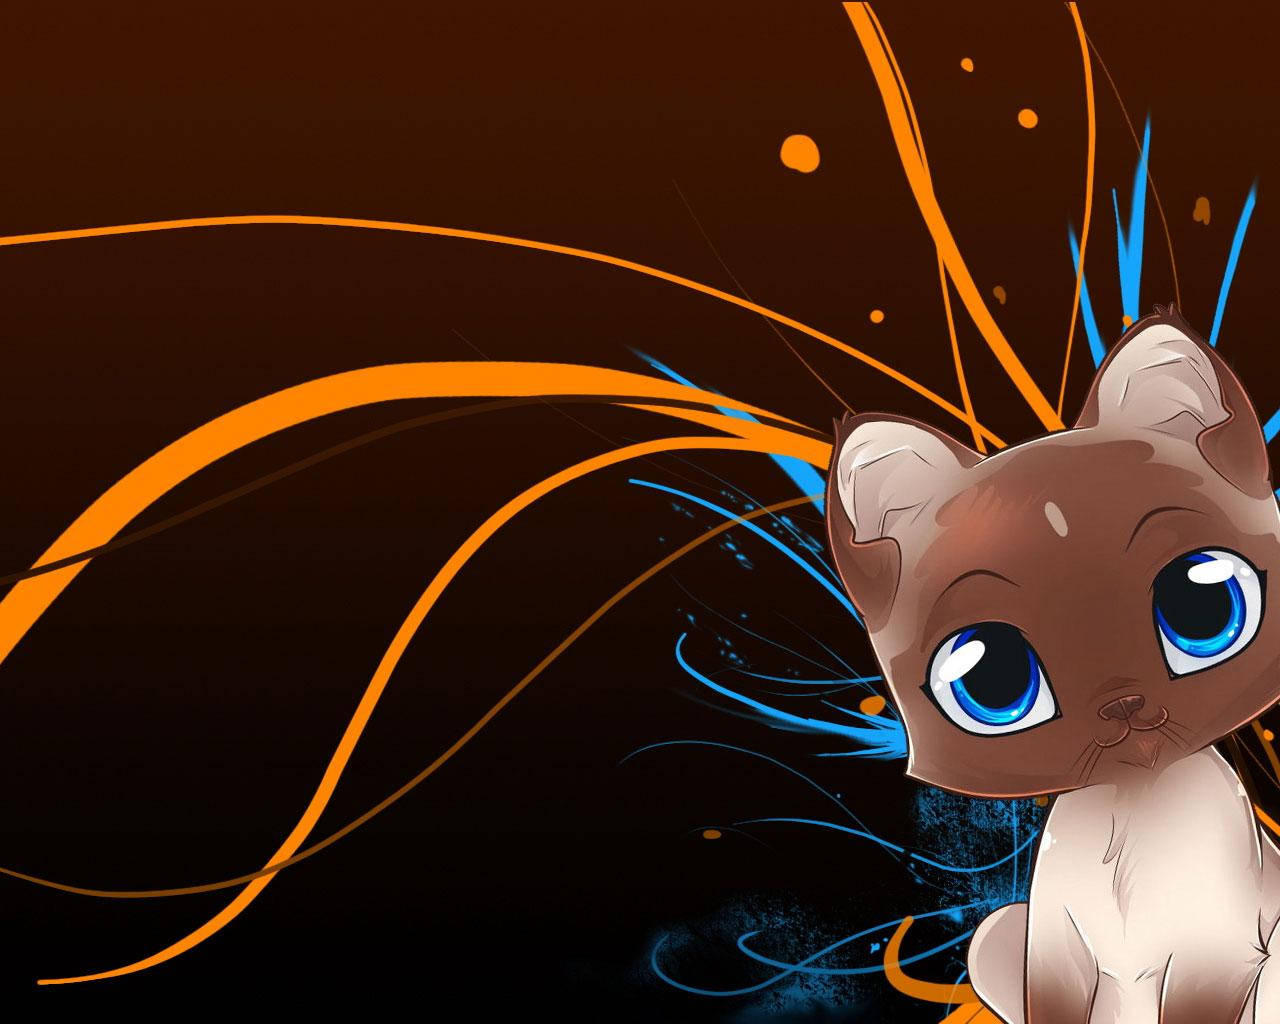 Kawaii Siamese Cat With Orange And Blue Lines Wallpaper